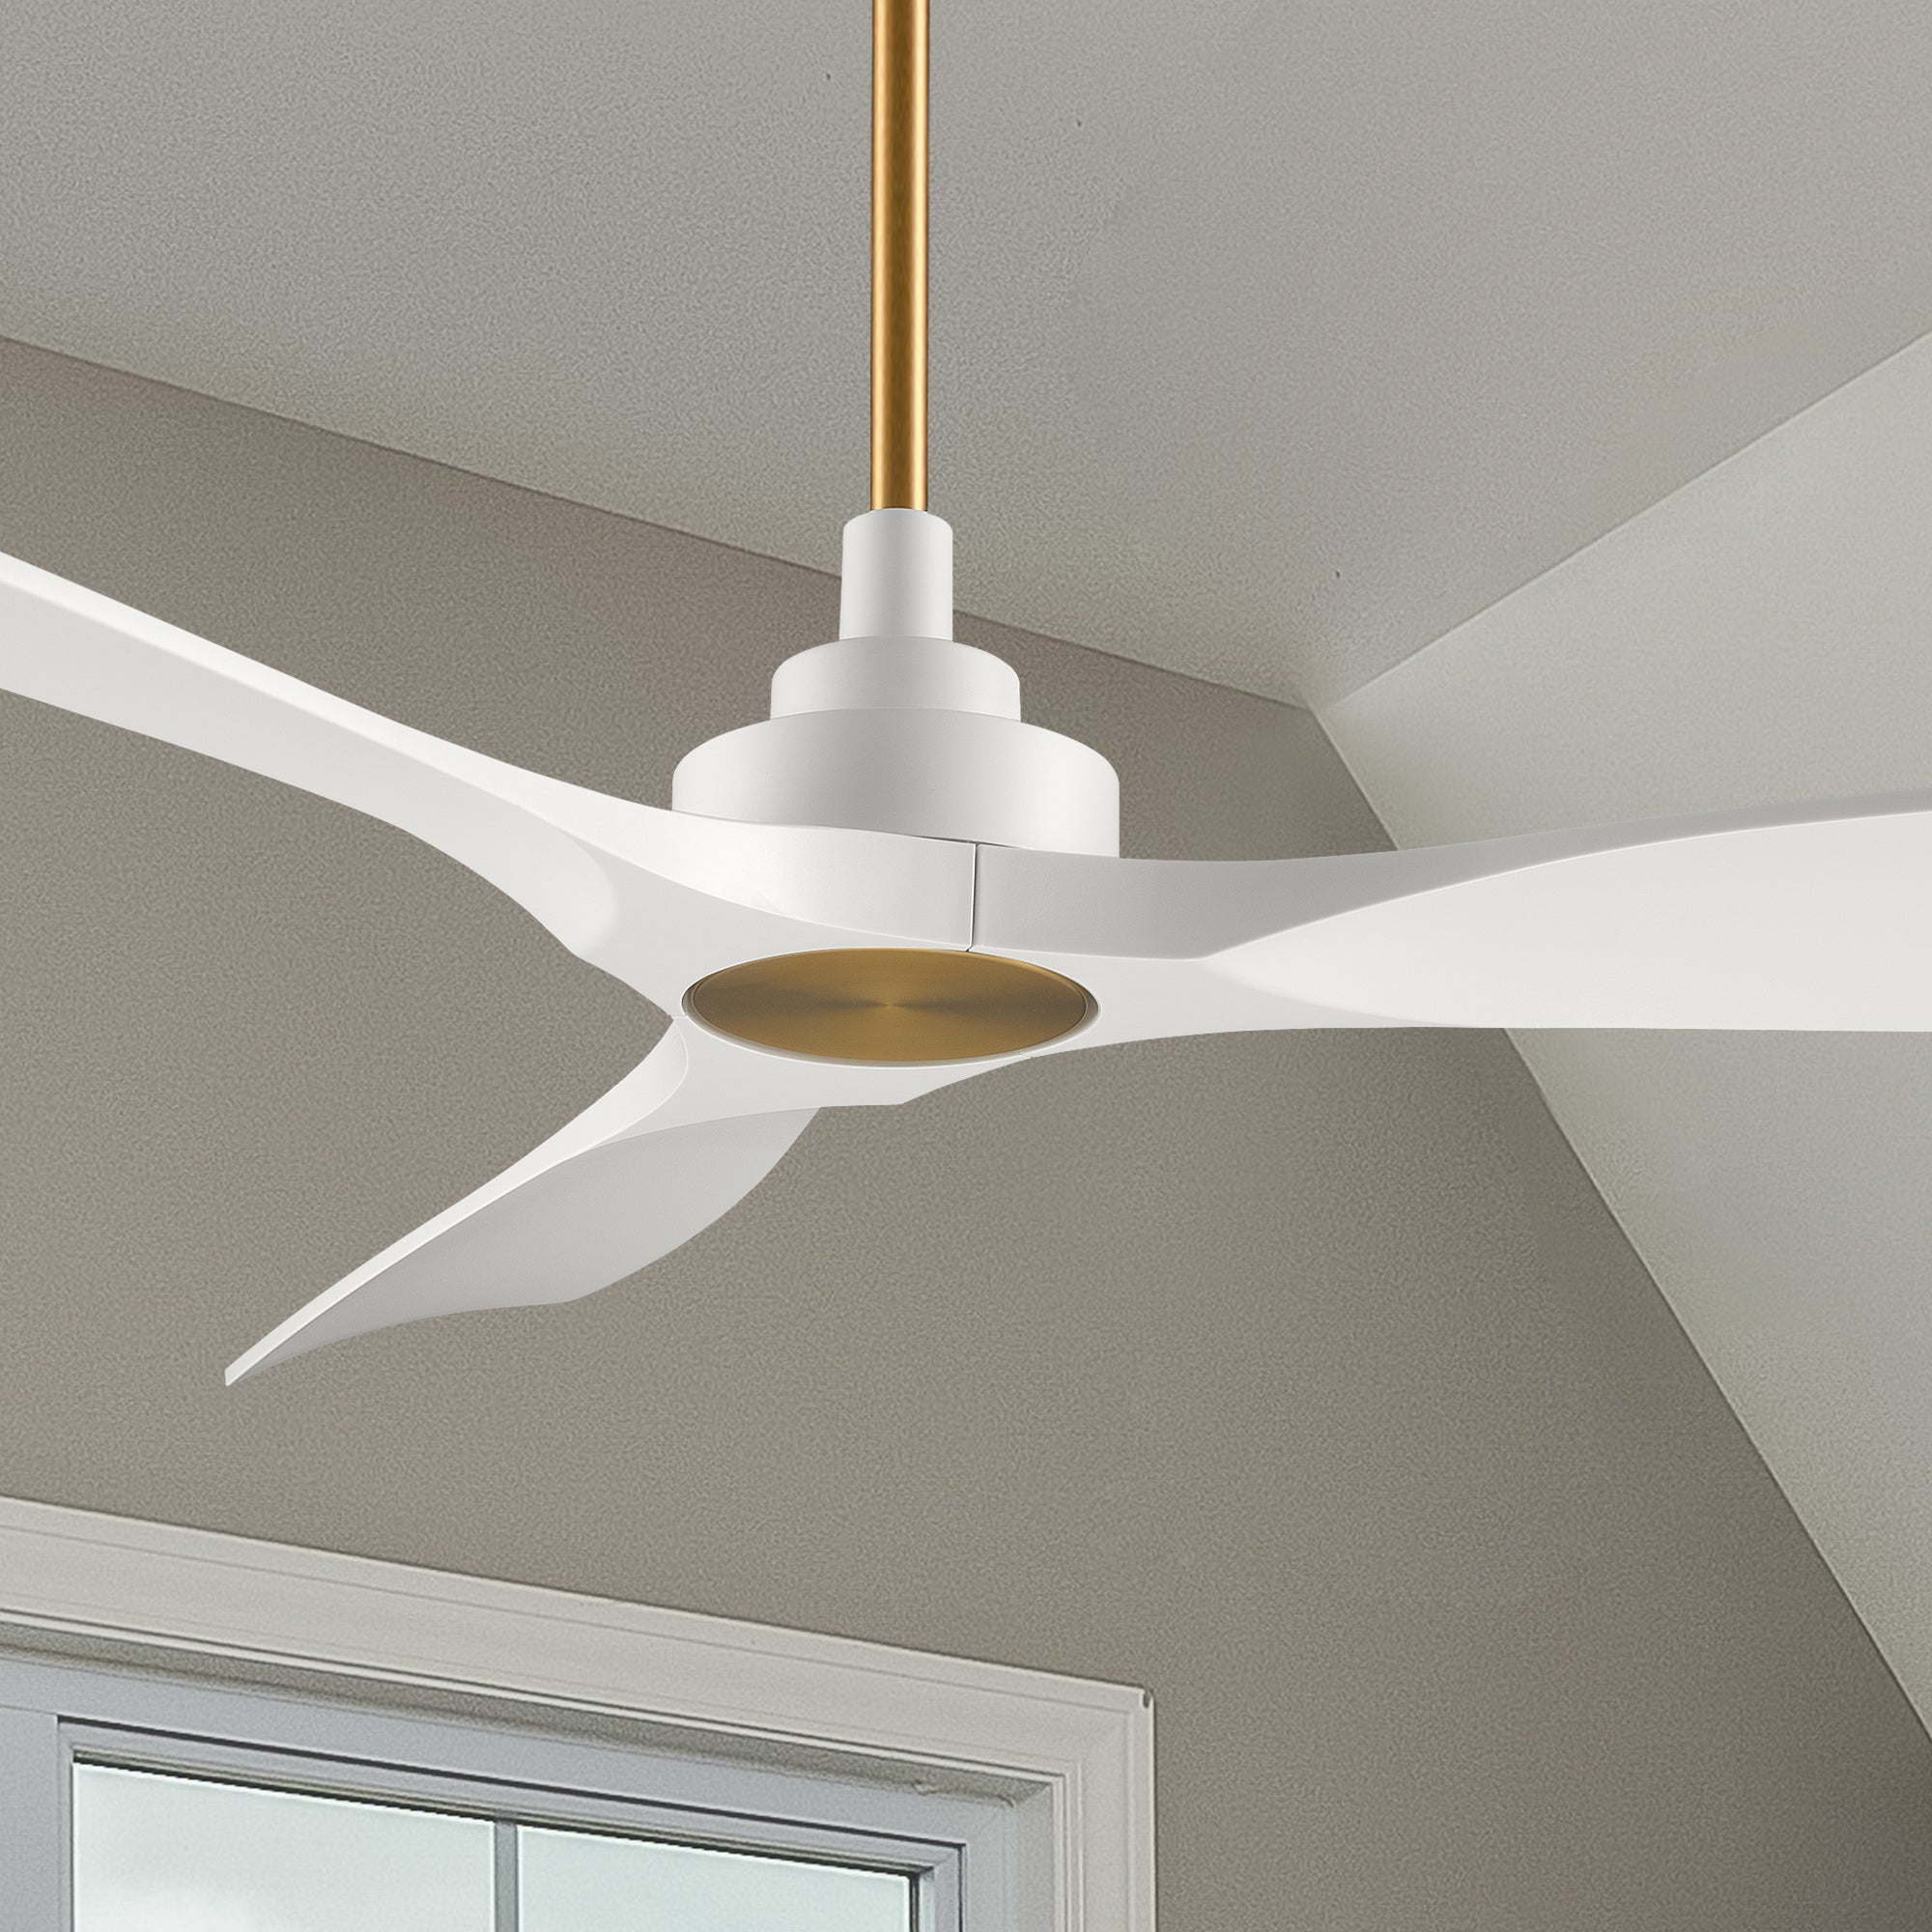 Smafan Carro Kilmory 52 inch ceiling fan with white and gold finish, strong ABS blades. Features Remote control to set fan preferences. 